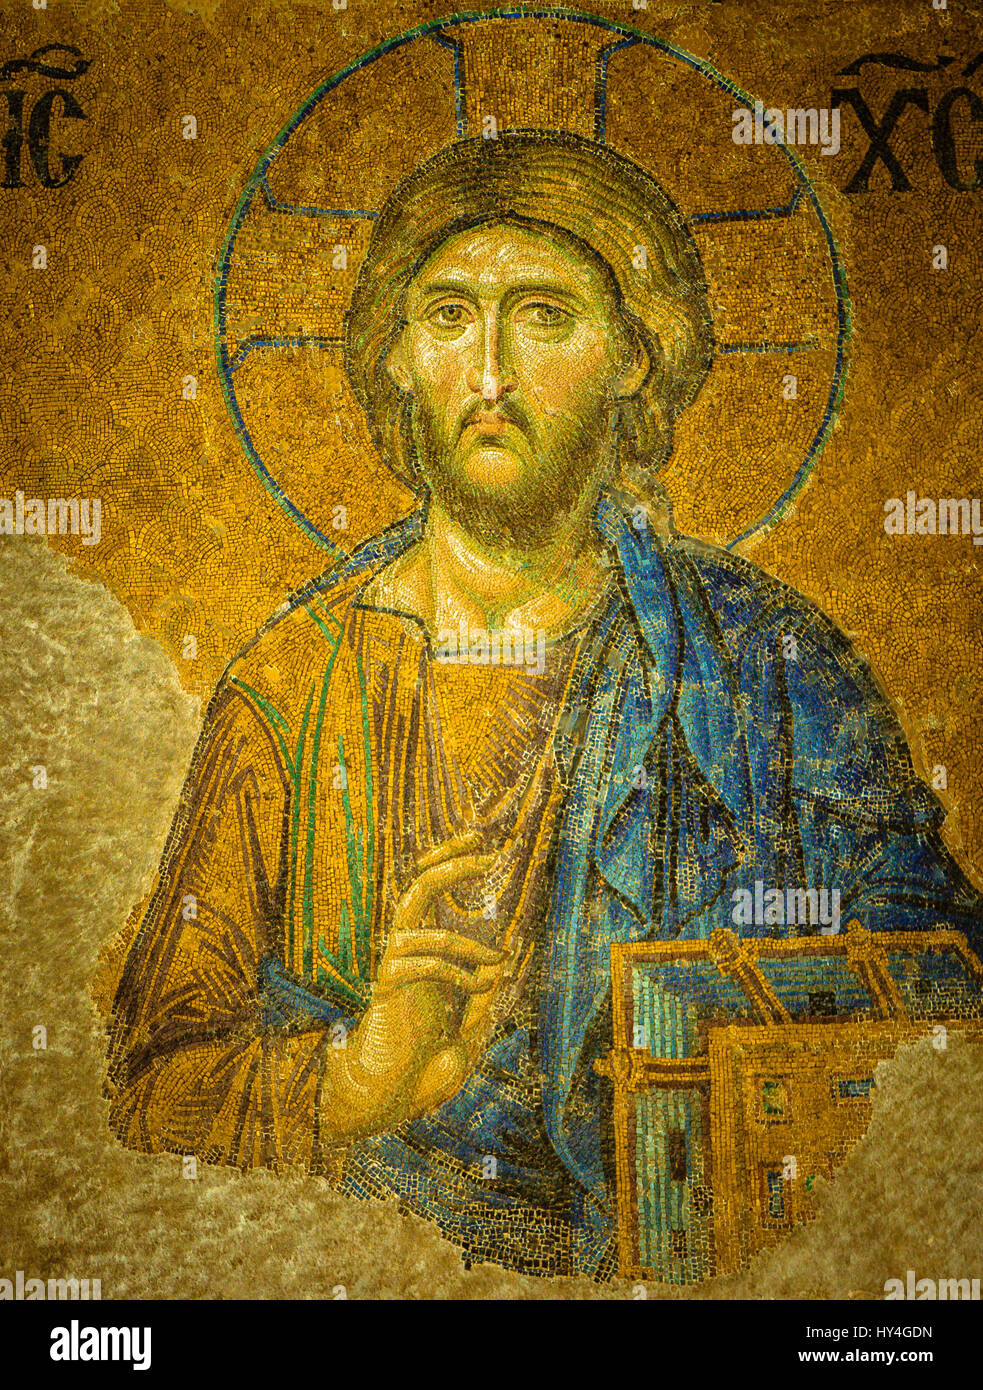 Jesus Christ as pantocrator,  a Byzantine mosaic in the interior of Hagia Sophia, Istanbul, Turkey - October 8, 2013 Stock Photo